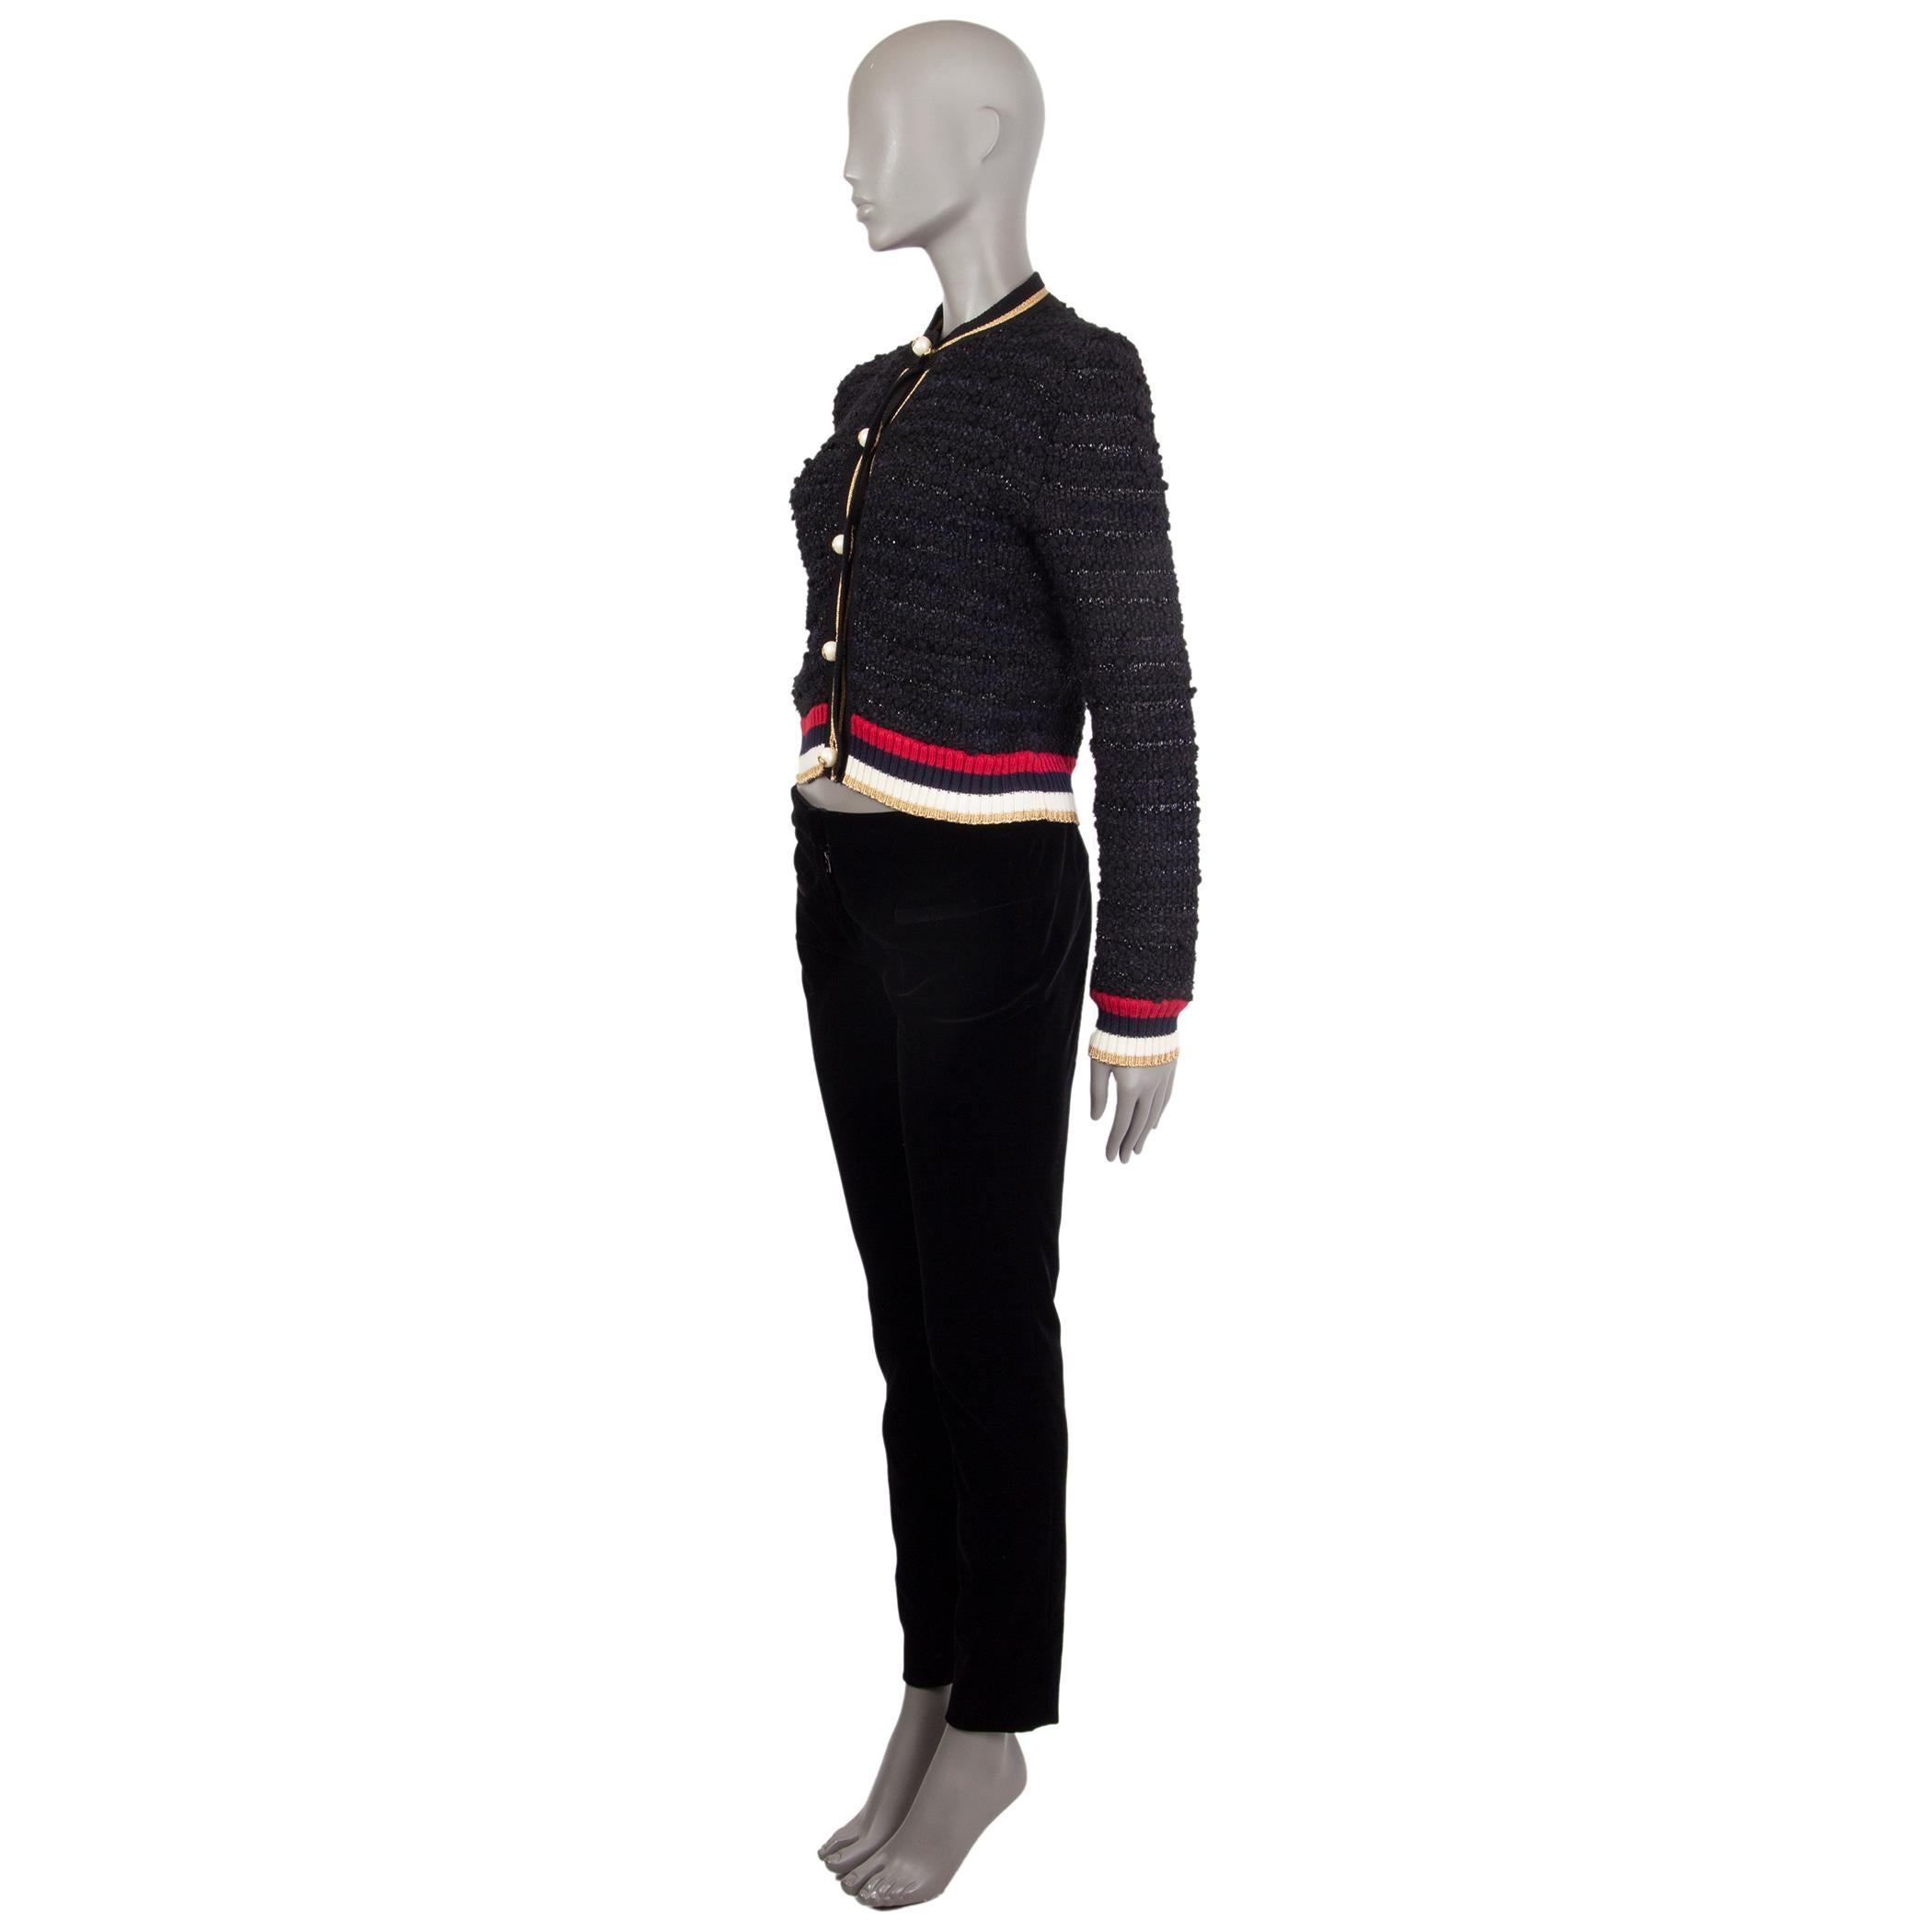 Gucci boucle-knit cardigan in black, gold, red, navy, and off-white nylon (85%) and mohair (15%); nylon (40%), viscose (38%), and paper (22%); and wool (73%) and nylon (27%). With crew neck, and ribbed details. Closes with GG pearl buttons on the